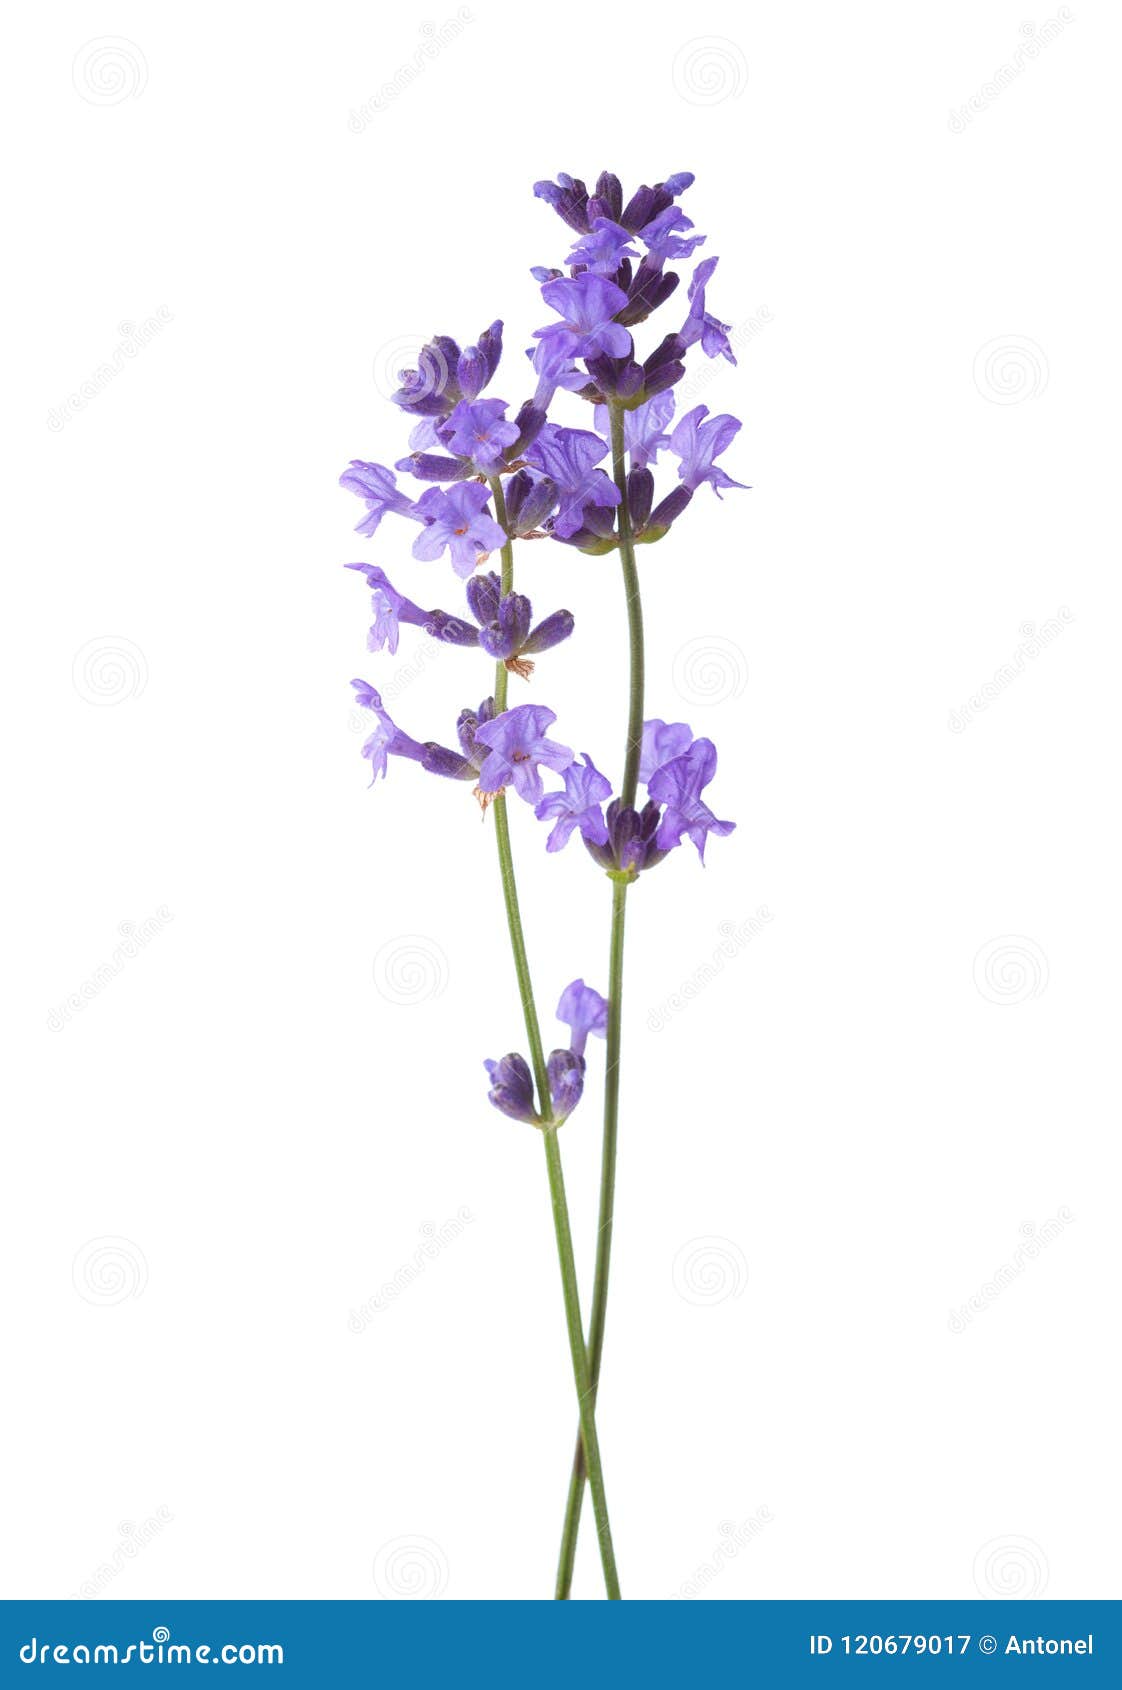 two sprigs of lavender  on white background